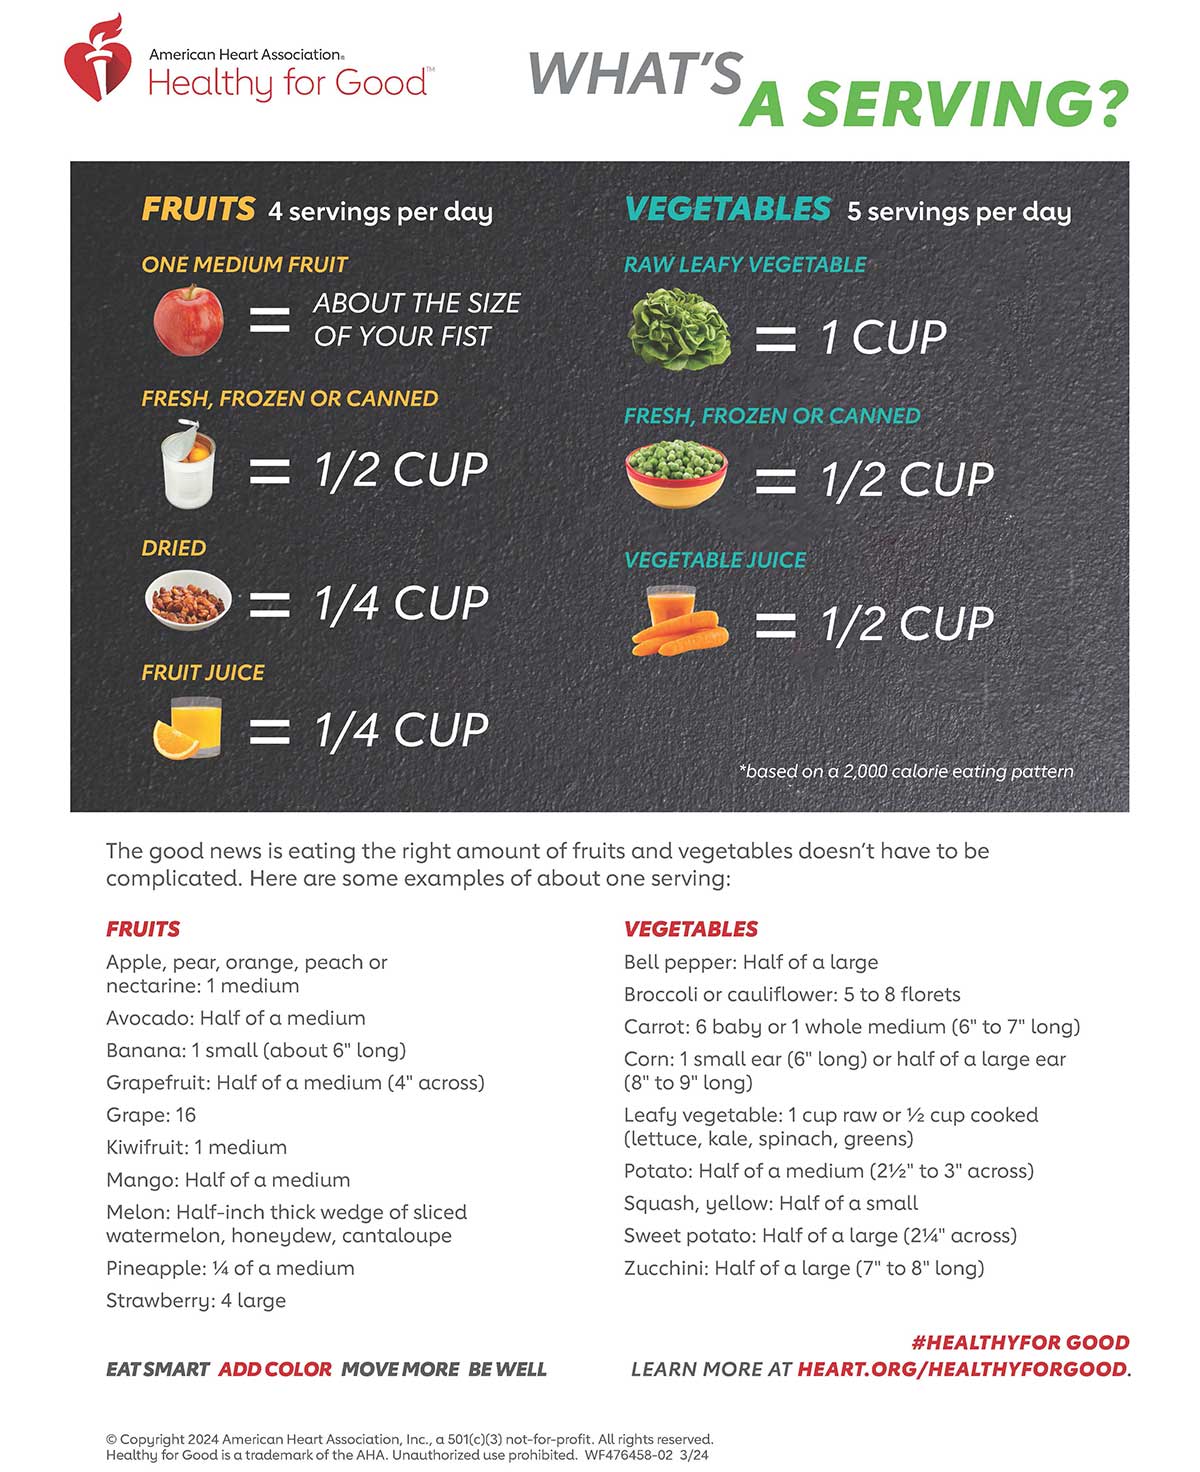 A Quick and Easy Way to Estimate Portion Size - Training Partners, Inc.